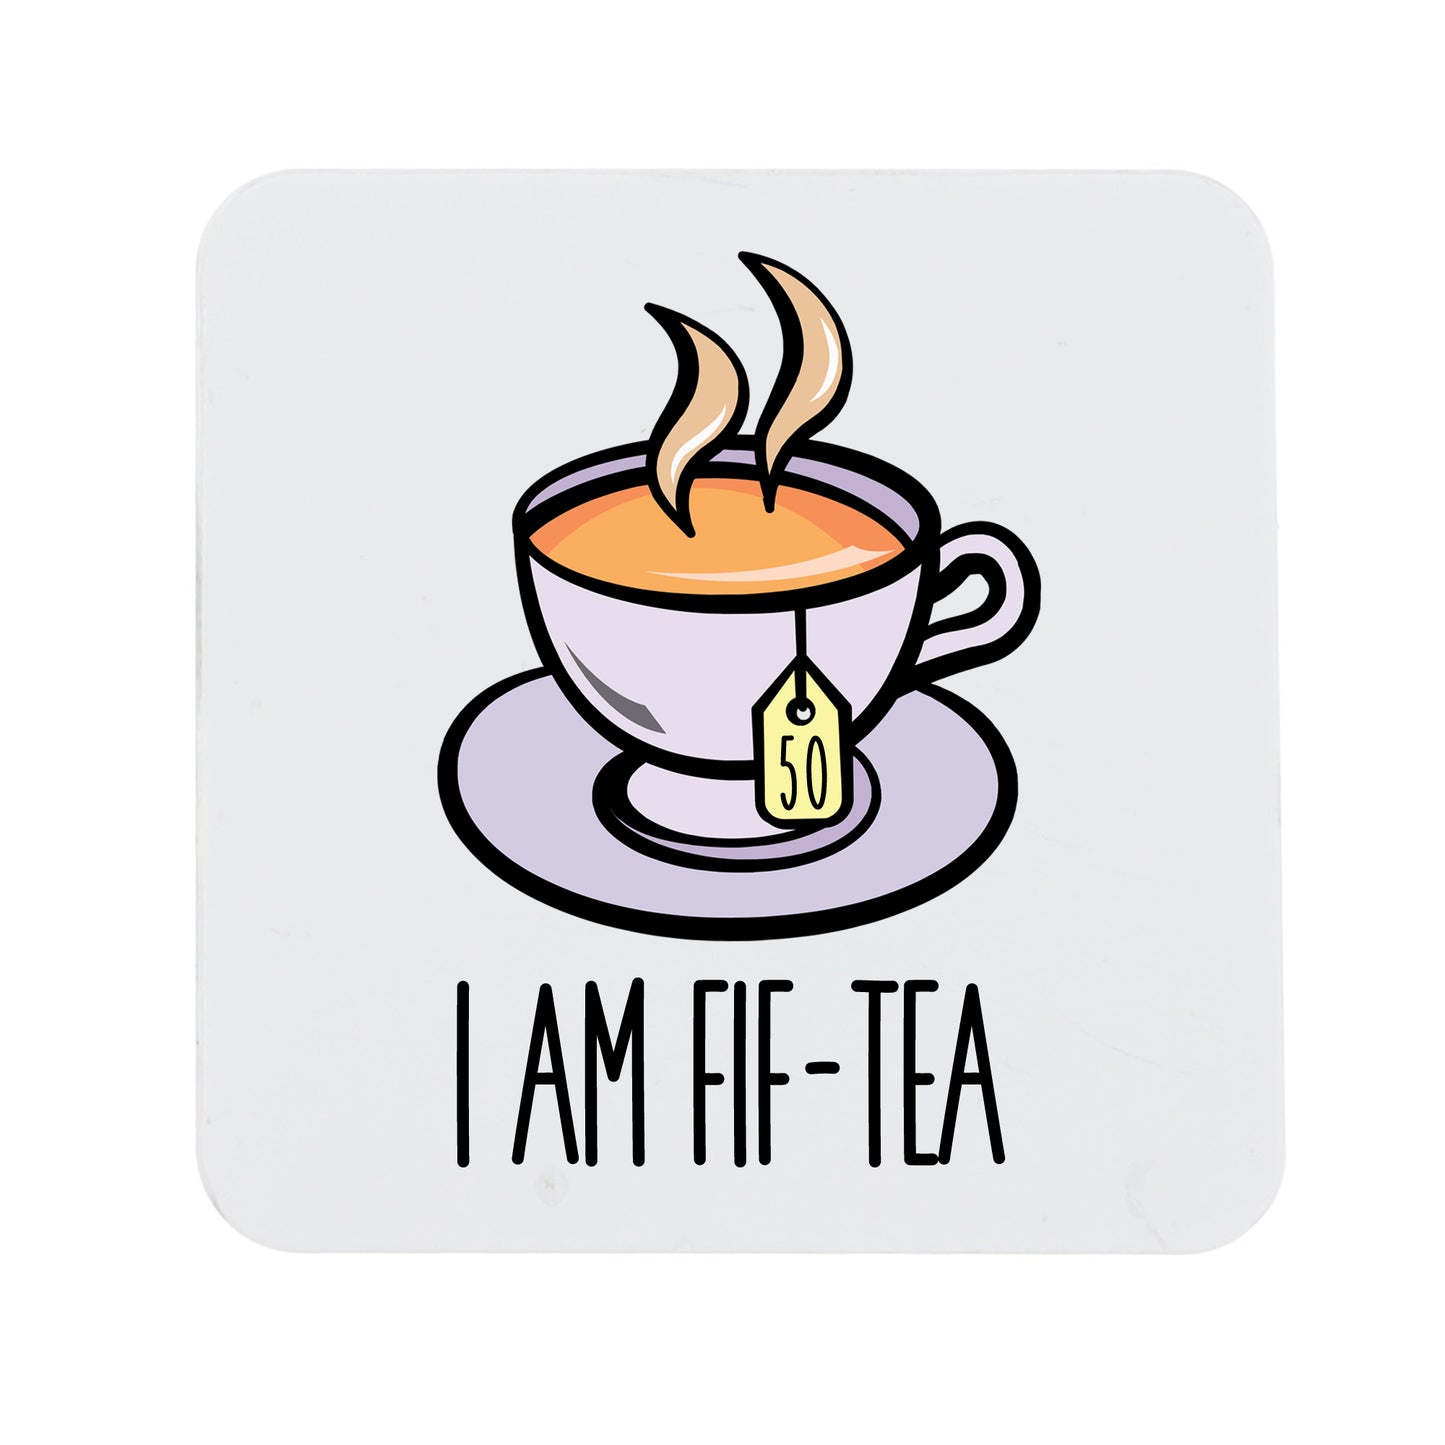 I Am Fif-Tea Funny 50th Birthday Mug Gift for Tea Lovers  - Always Looking Good - Printed Coaster Only  